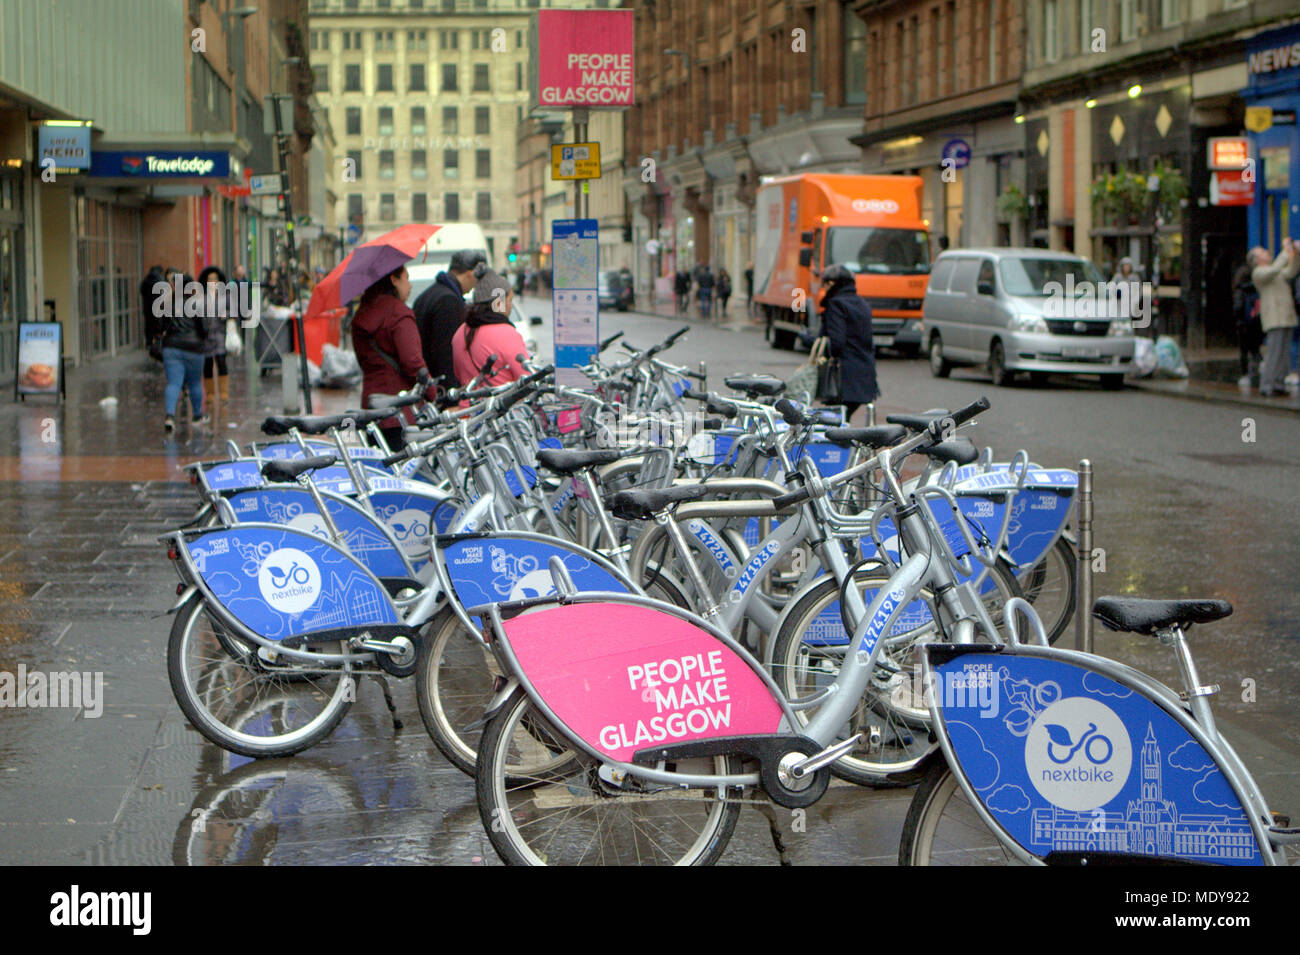 people make Glasgow nextbike cycle hire scheme community bicycle project Queen Street, Glasgow, UK Stock Photo